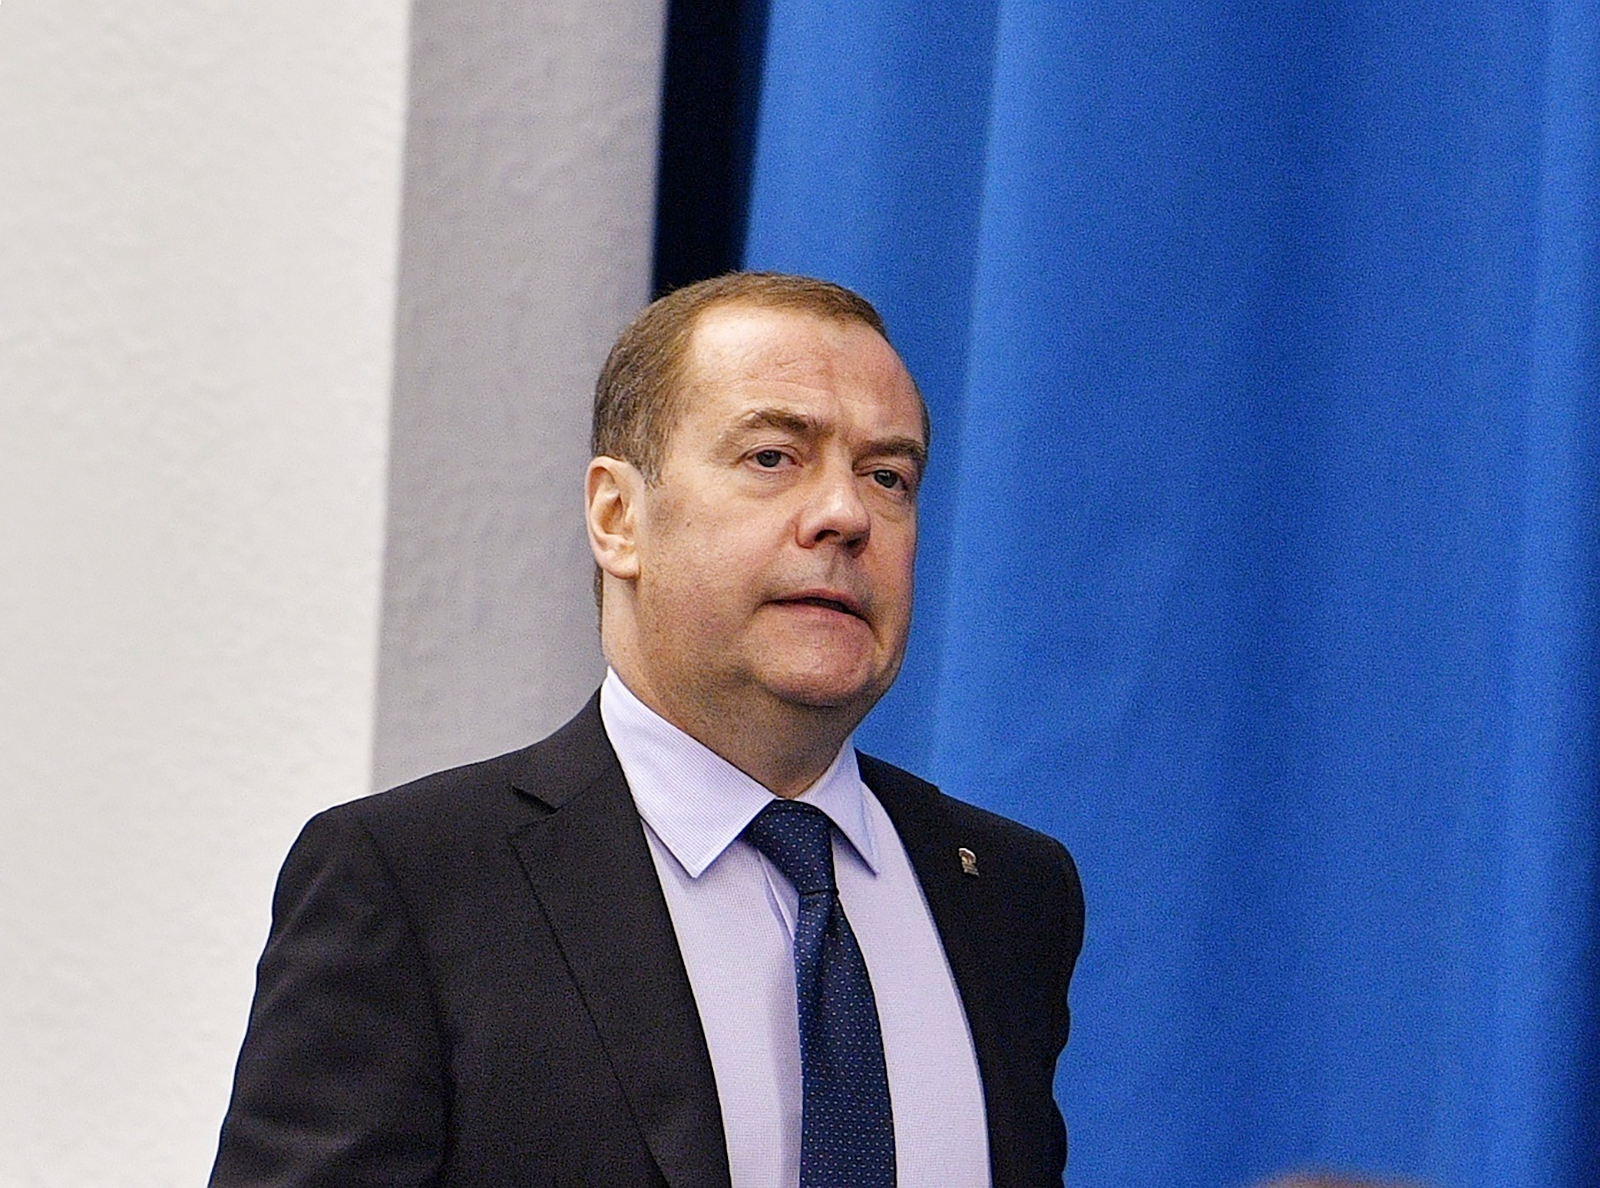 Dmitry Medvedev attends a meeting in Moscow, Russia on July, 18.